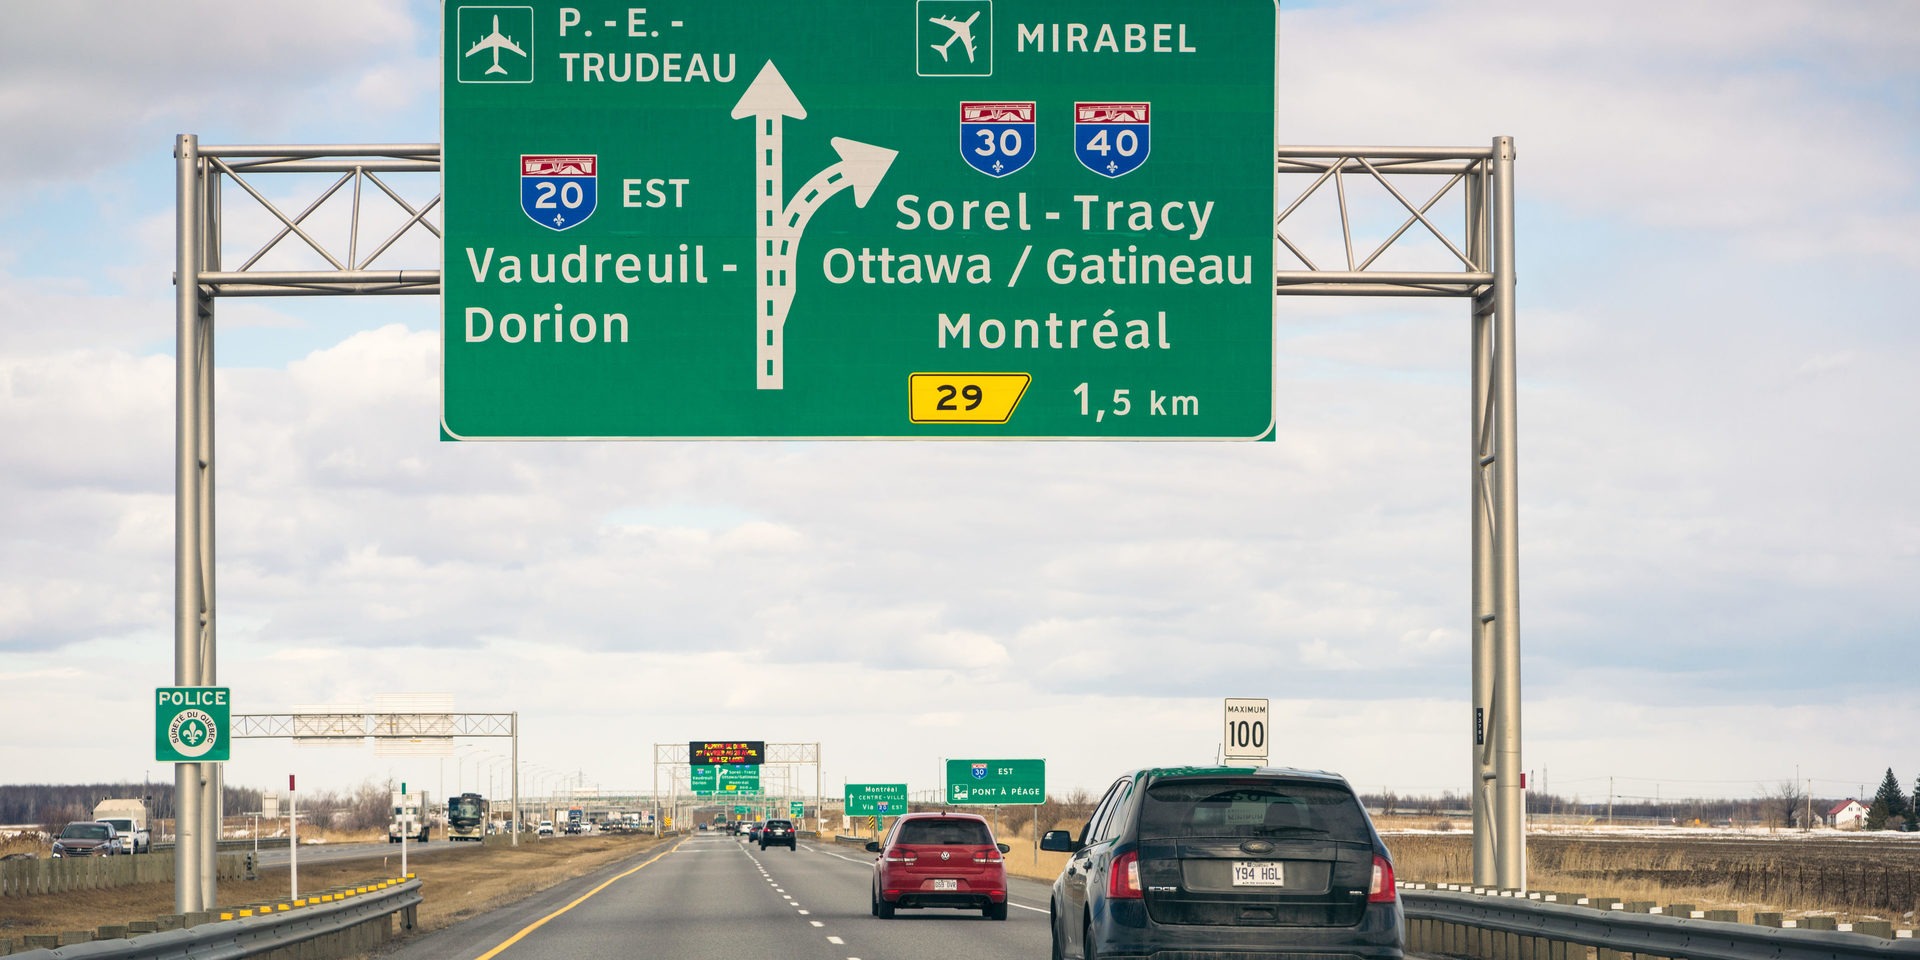 cheapest travel from toronto to montreal